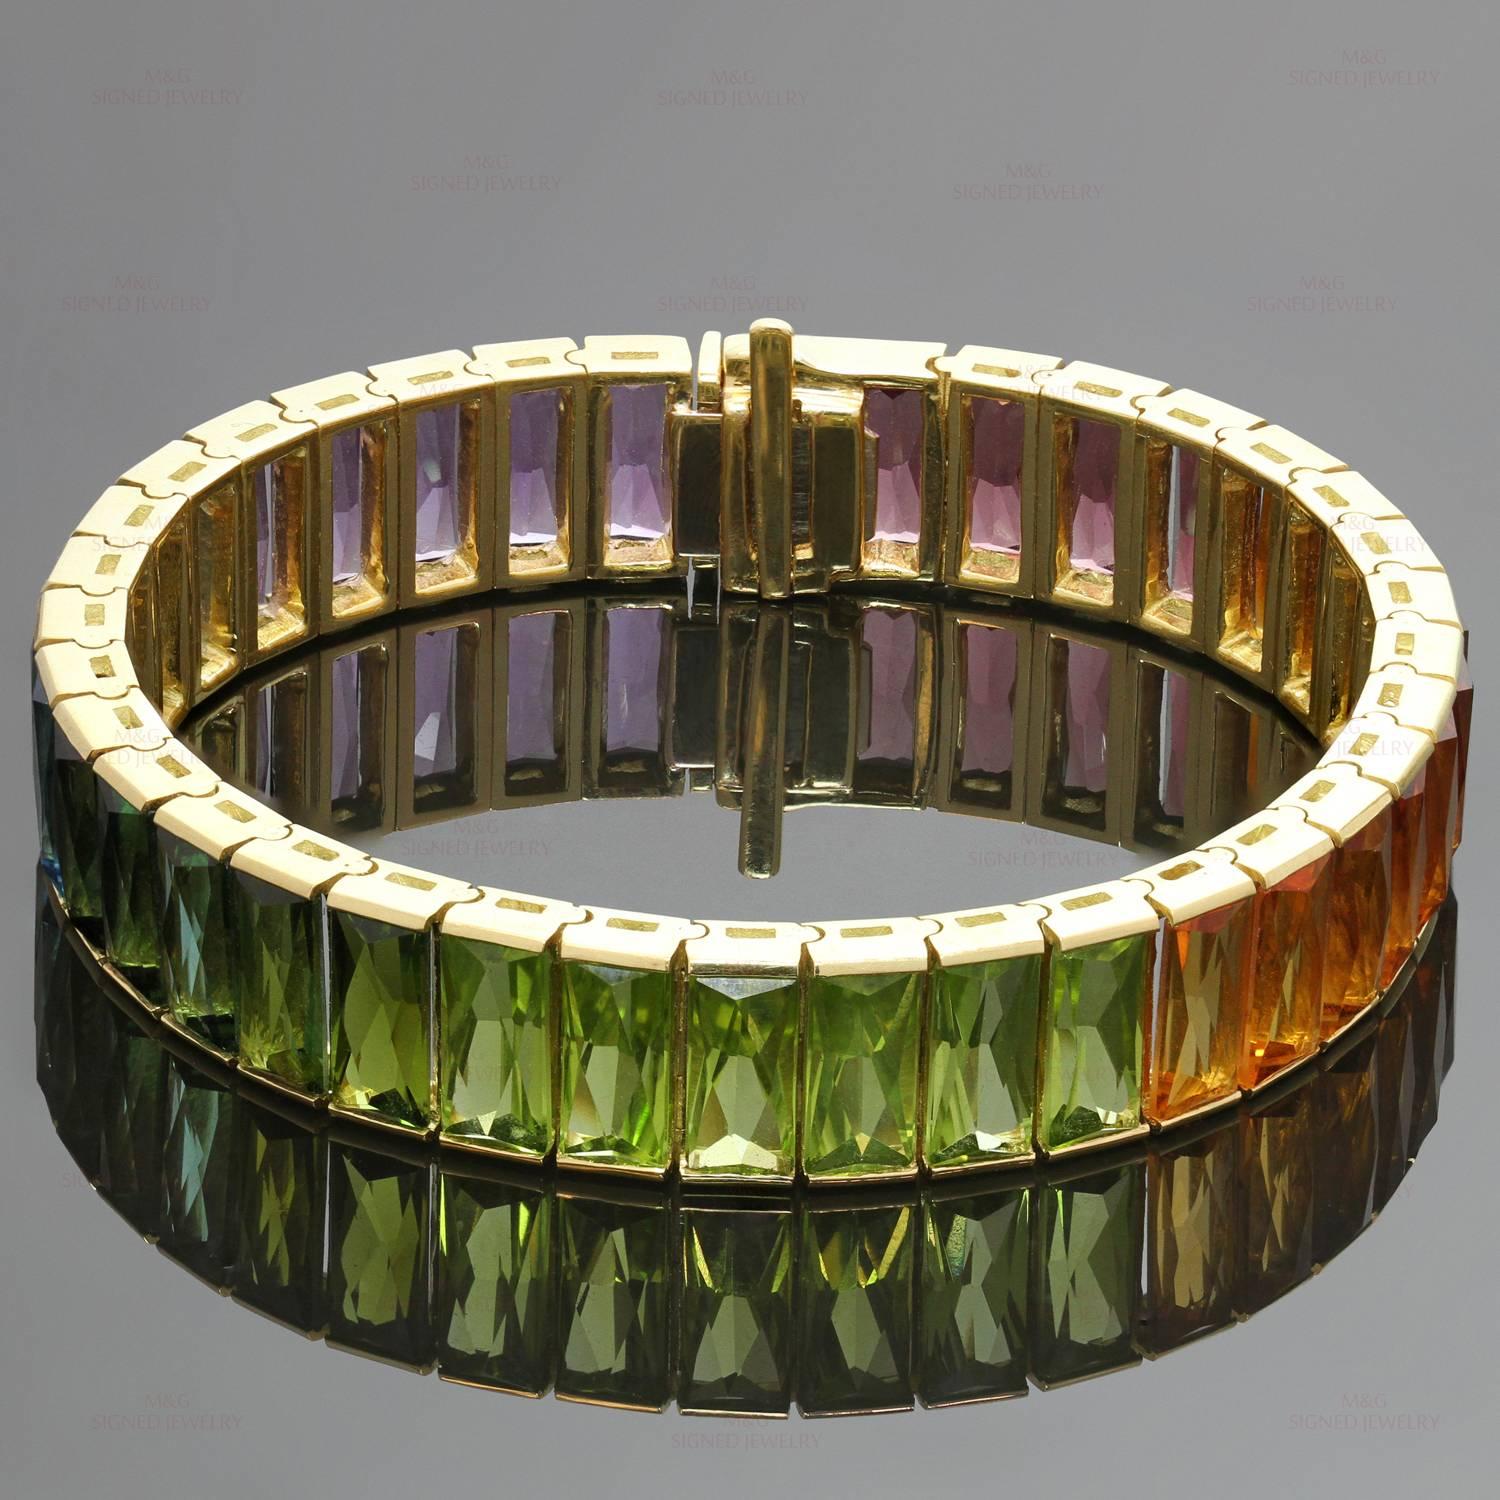 The fabulous H. Stern bracelet is crafted in 18k yellow gold and set with a rainbow gradient of faceted rectangular-cut gemstones of an estimated 41.65 carats - amethyst (about 5.15 carats), blue topaz (about 6.75  carats), tourmaline (about 6.35